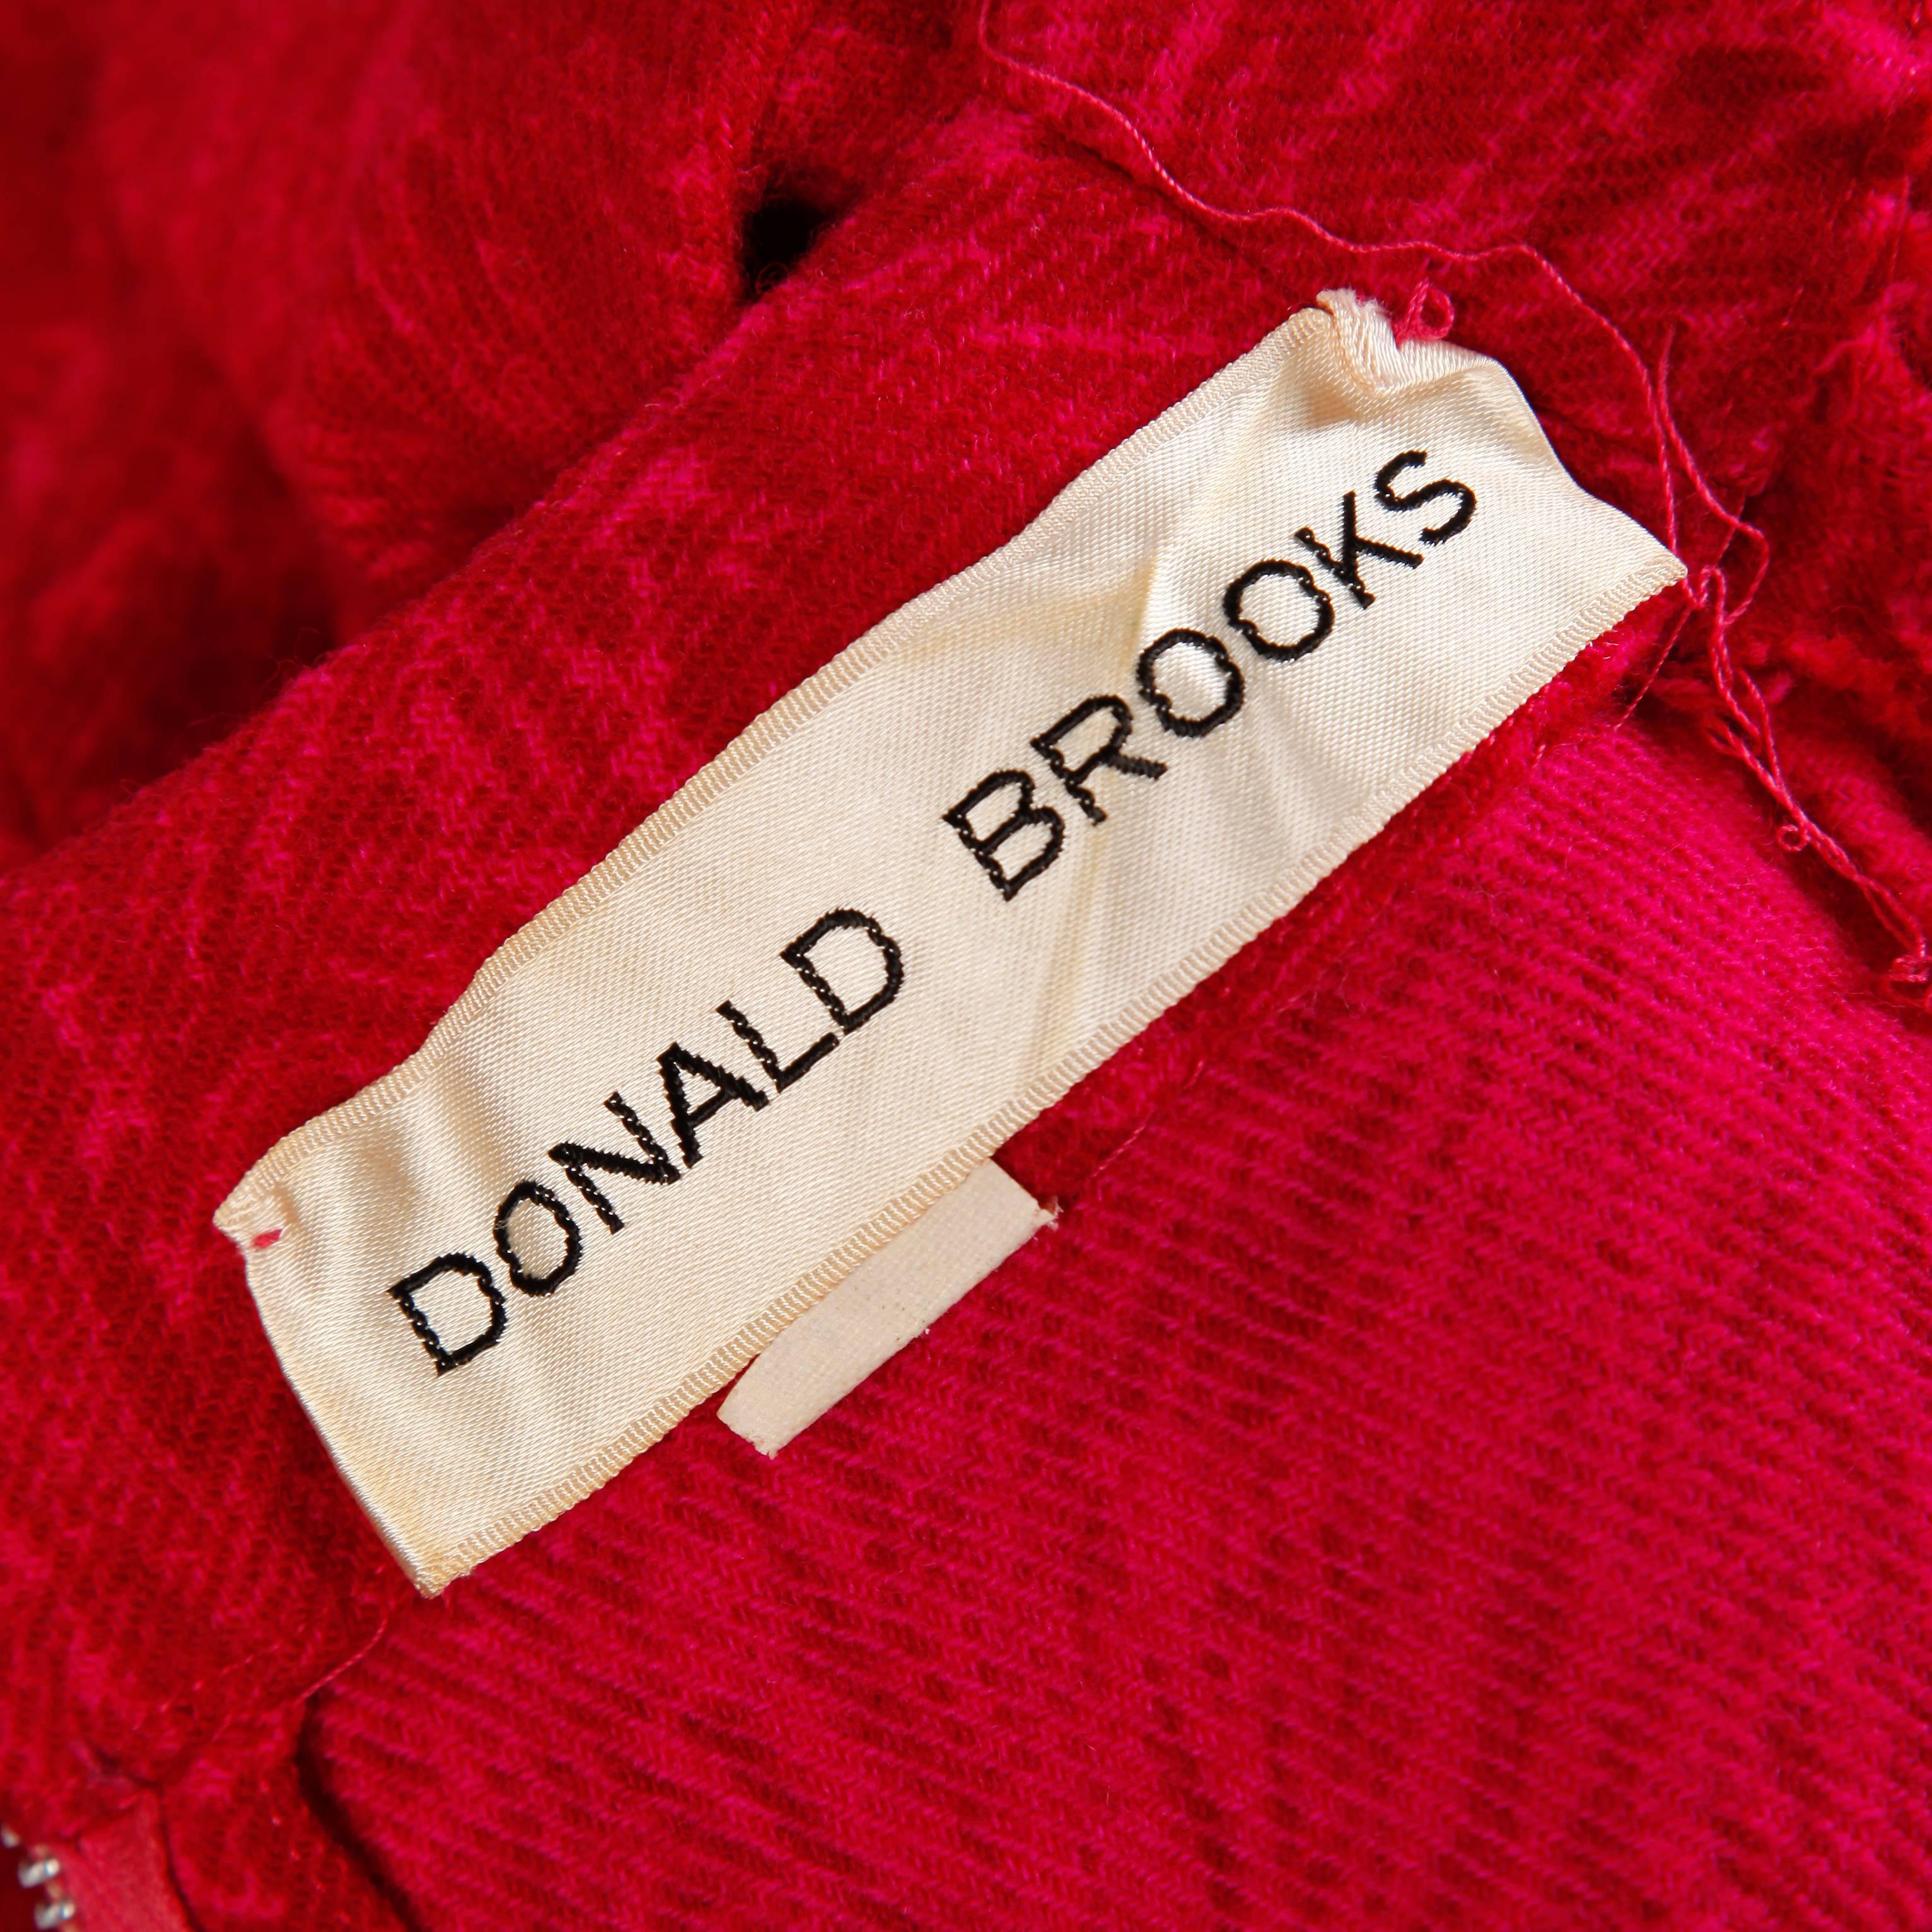 Rare early Donald Brooks! This is from one of Donald Brooks first collections in the early 1960s. The dress features woven wool in a pink and fuchsia swirl pattern, a long waist sash, and 3/4 length sleeves. Very flattering cut.

Details: